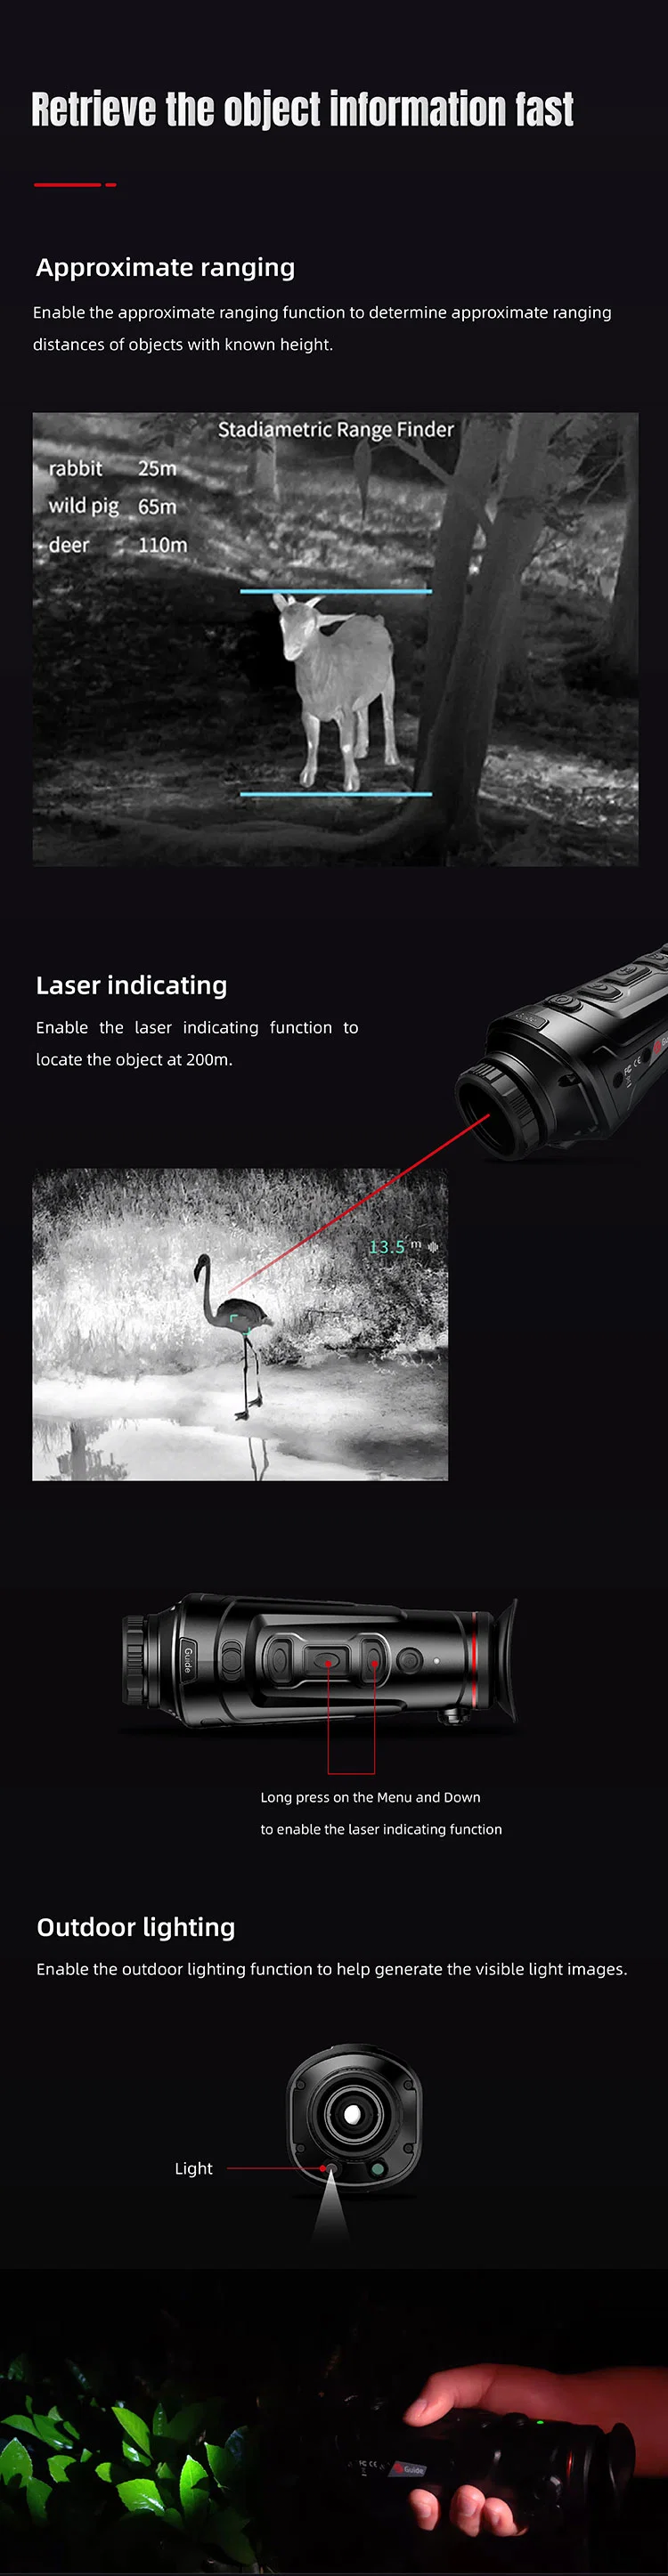 Civil Handheld Guide Full Color Video Output Night Vision Monocular Sights Hunting Equipment